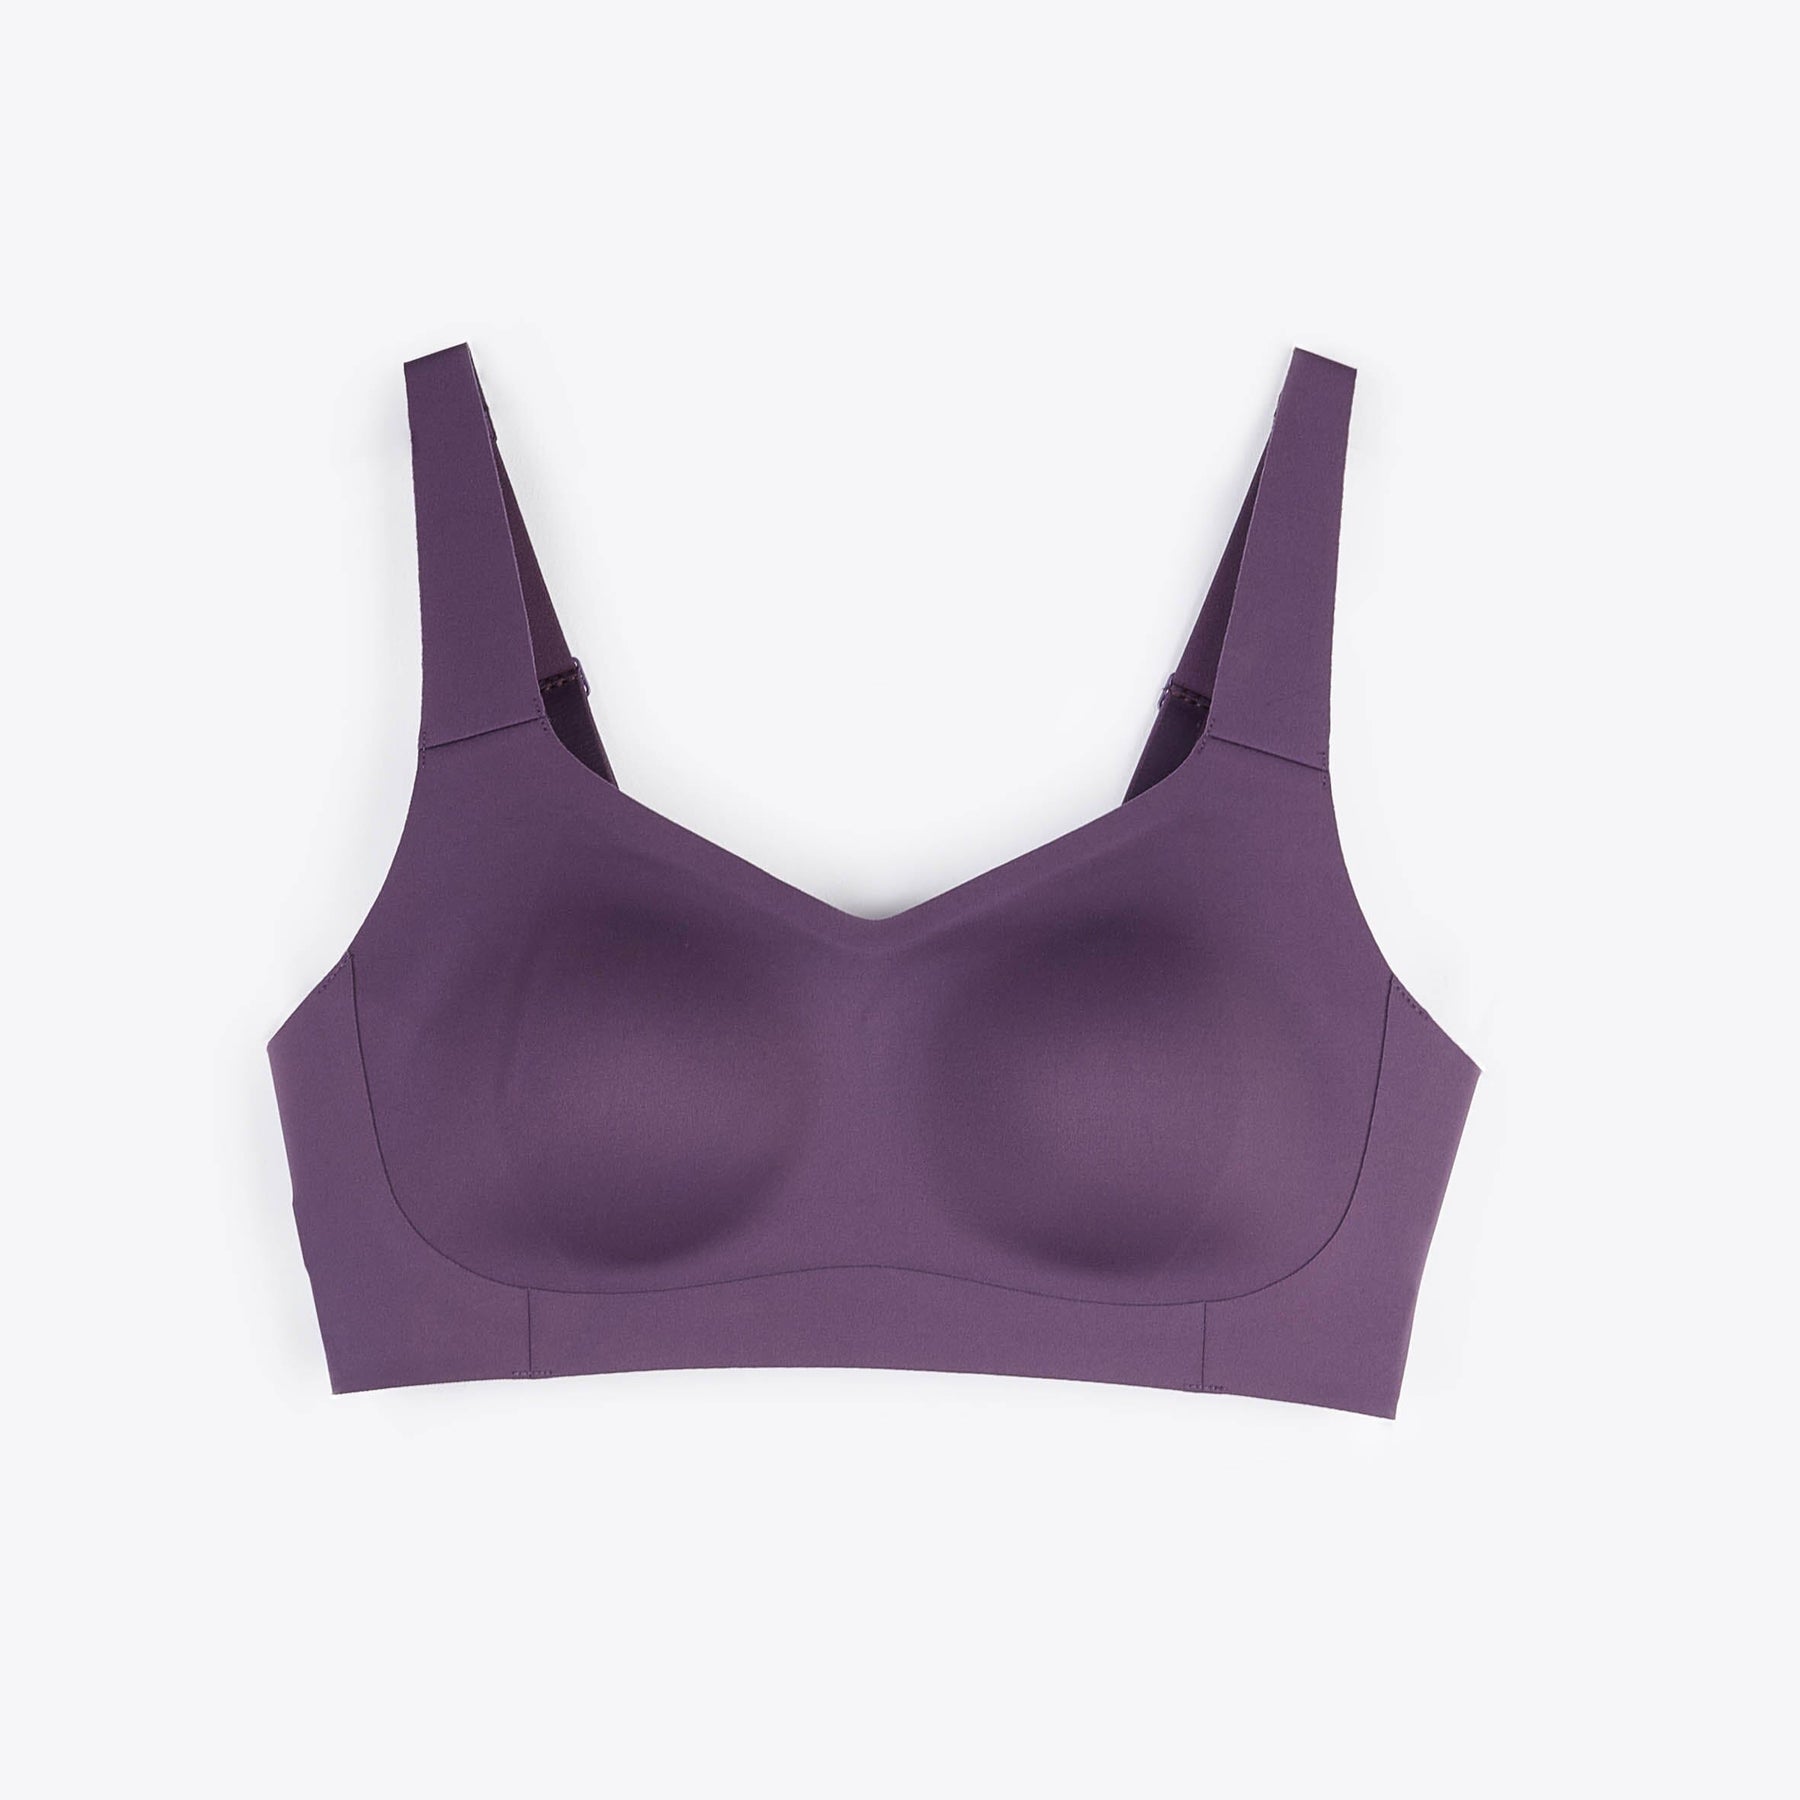 Solution Max Free REextraSkin™ Light Shaping Bra Top – Her own words